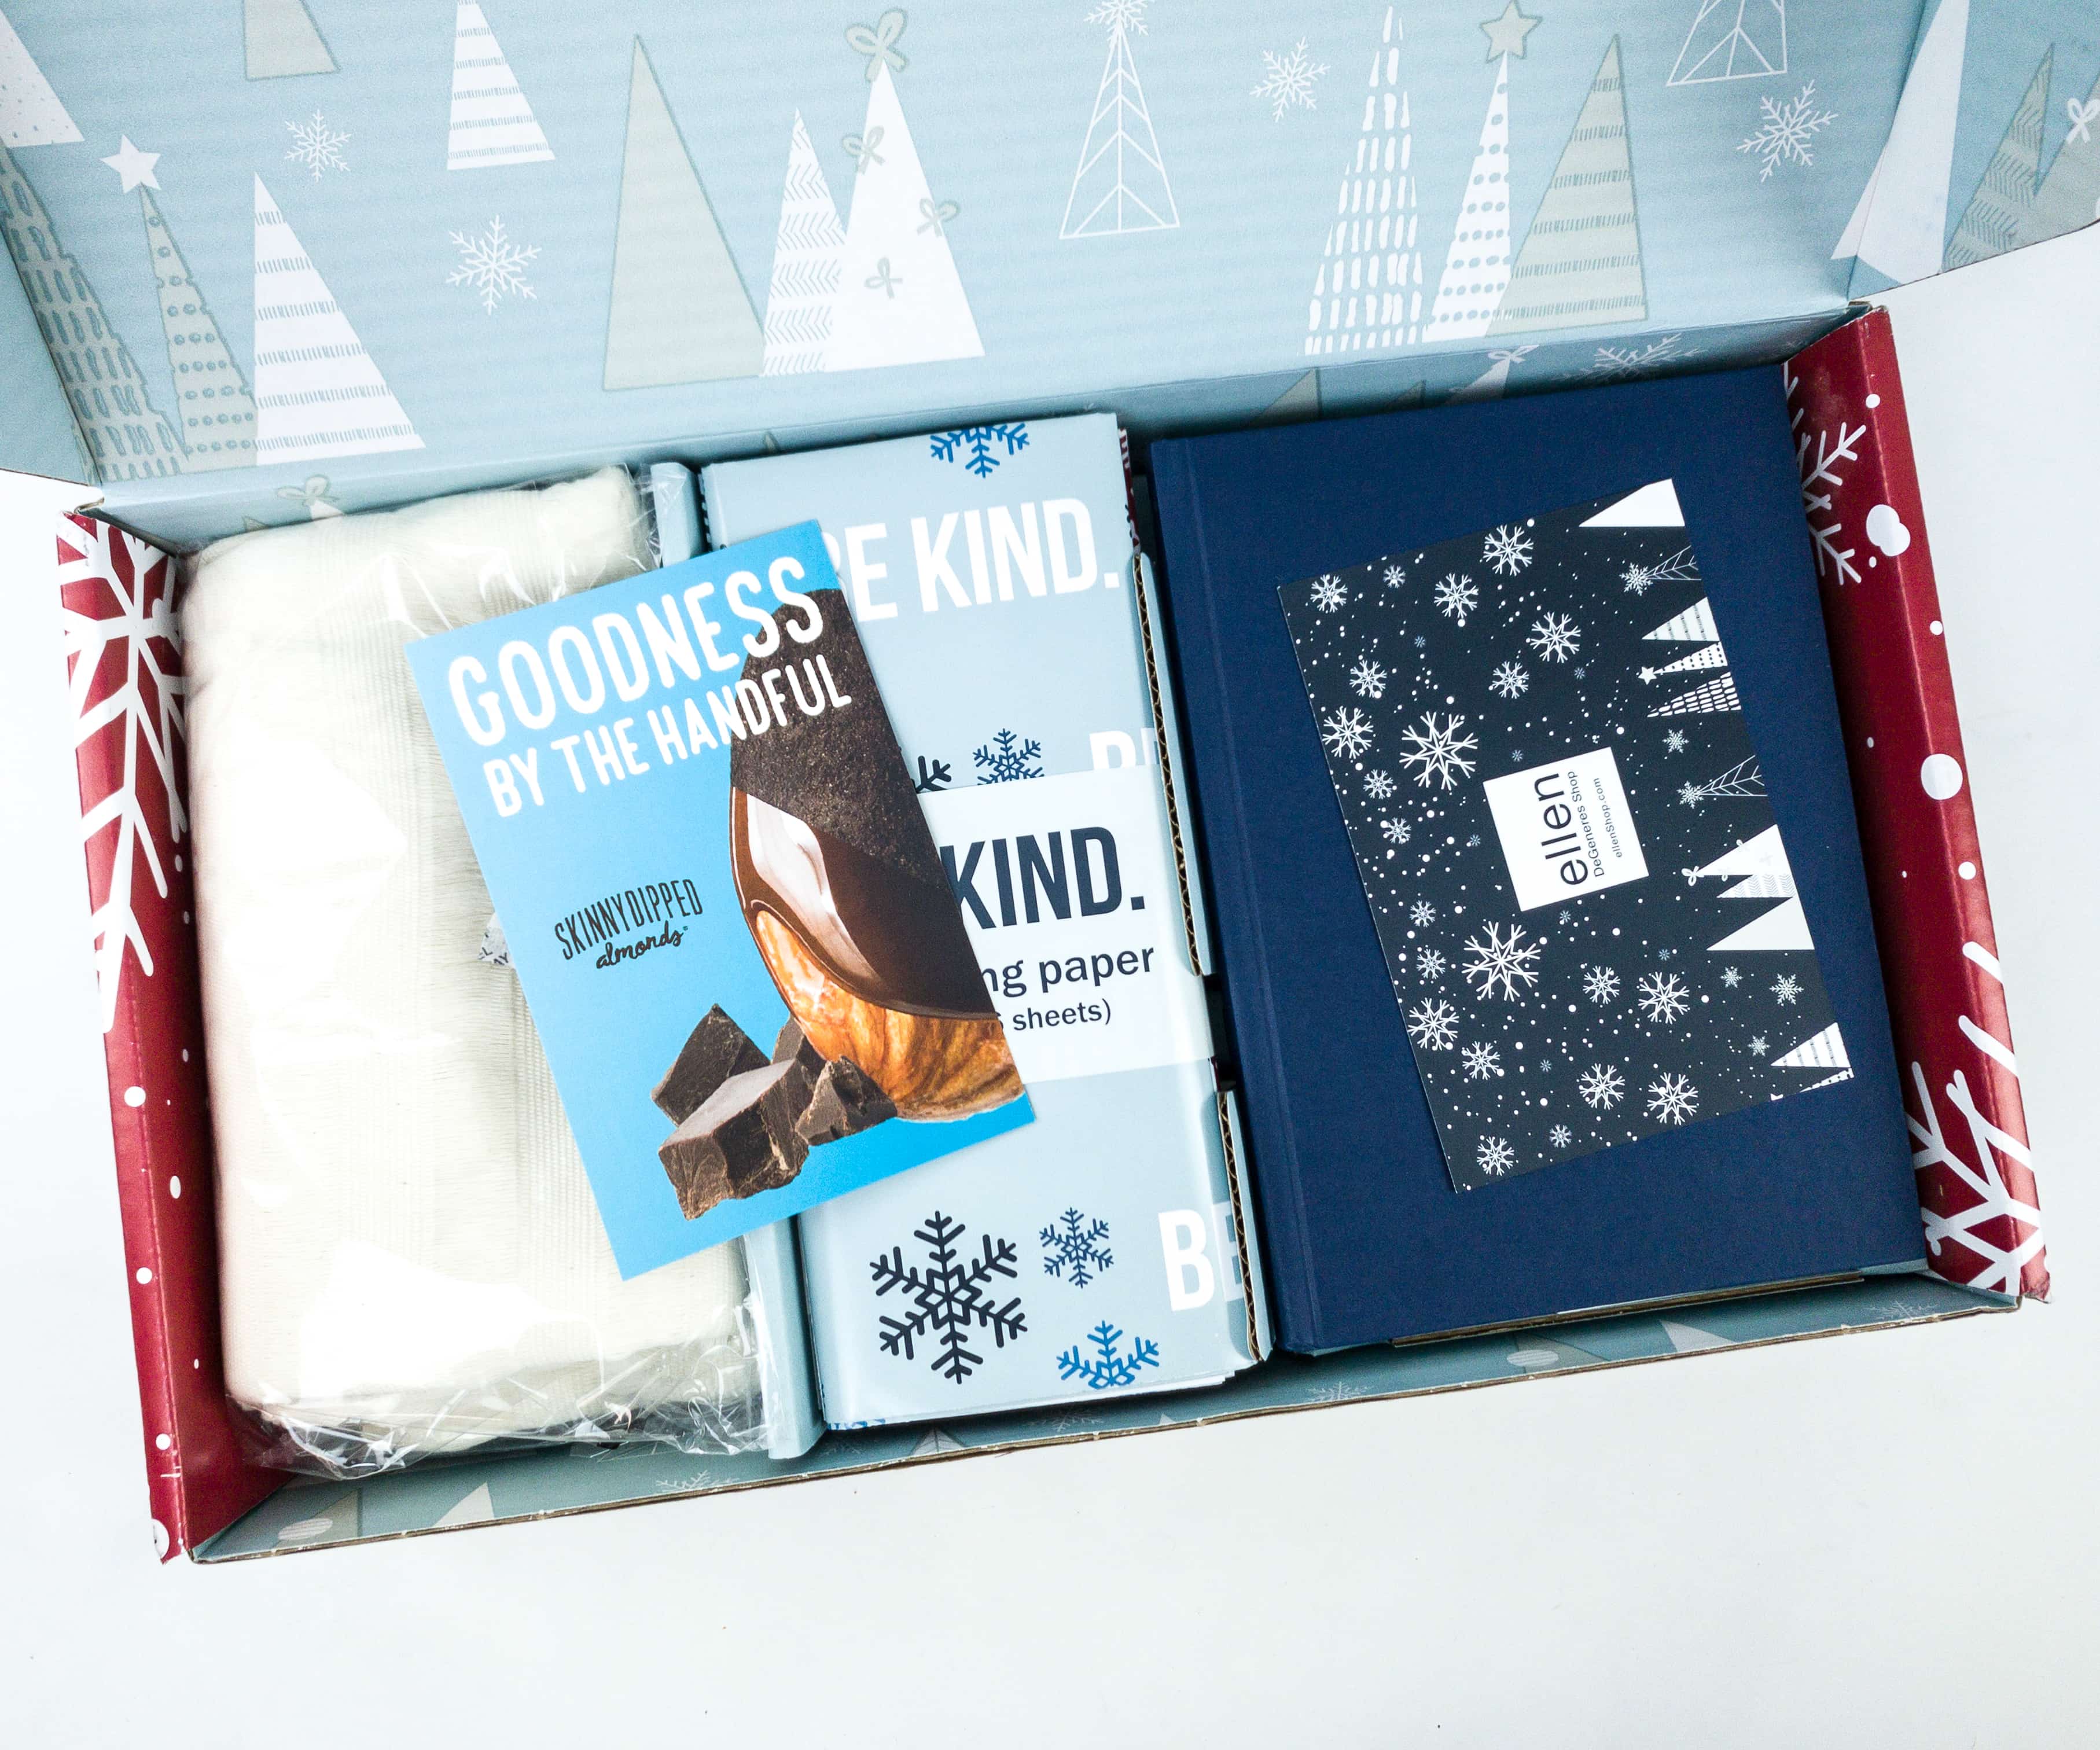 Be Kind by Ellen Subscription Review - Winter 2019